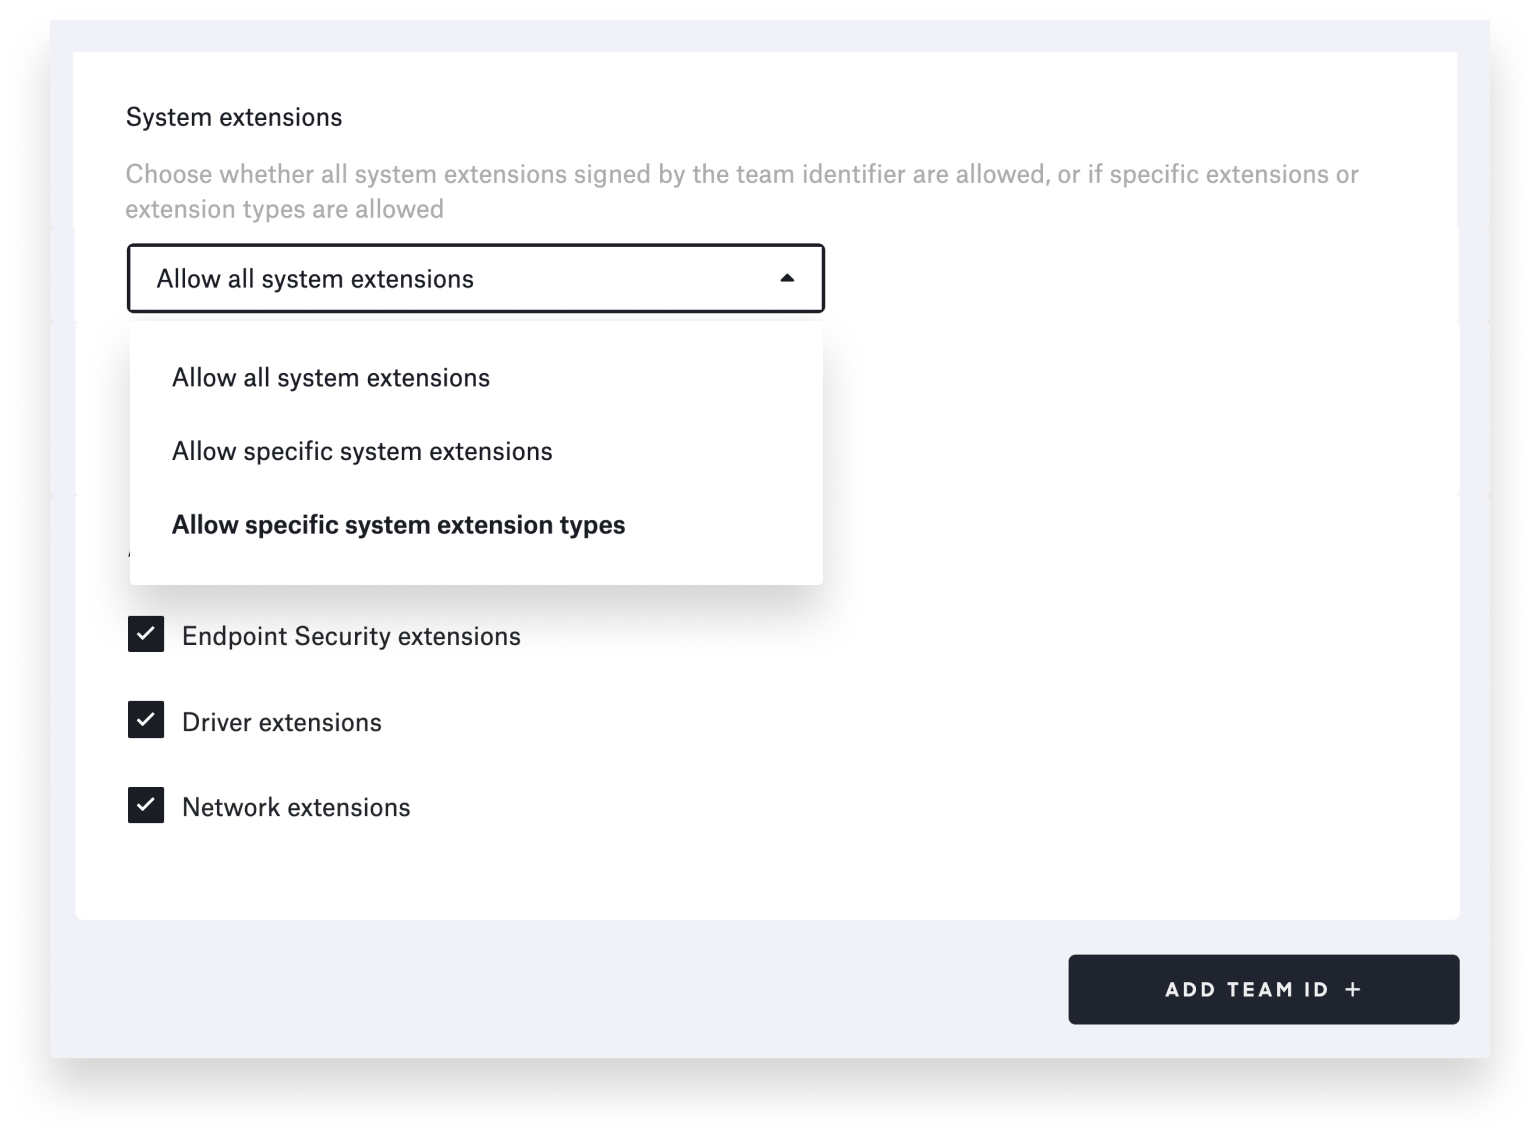 system extensions allow specific types of system extensions